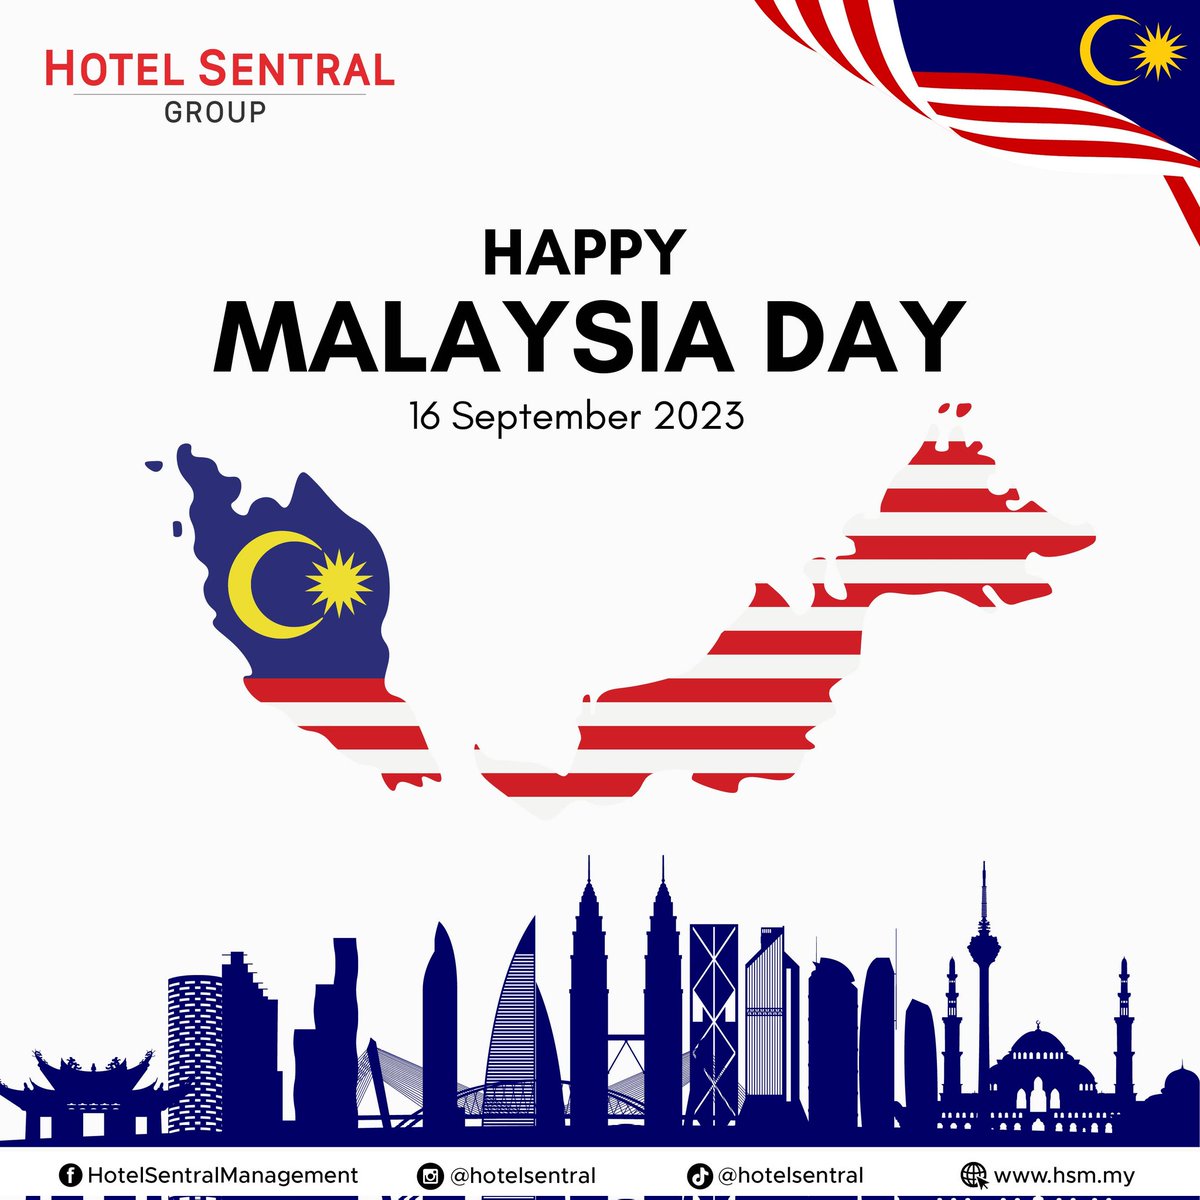 Happy Malaysia Day! 🇲🇾
We come together to celebrate the anniversary of the formation of Malaysia. 
Let's cherish the spirit of togetherness and unity. 
#HappyMalaysiaDay #MalaysiaDay #KamiAnakMalaysia #SehatiSejiwa #MalaysiaMadani